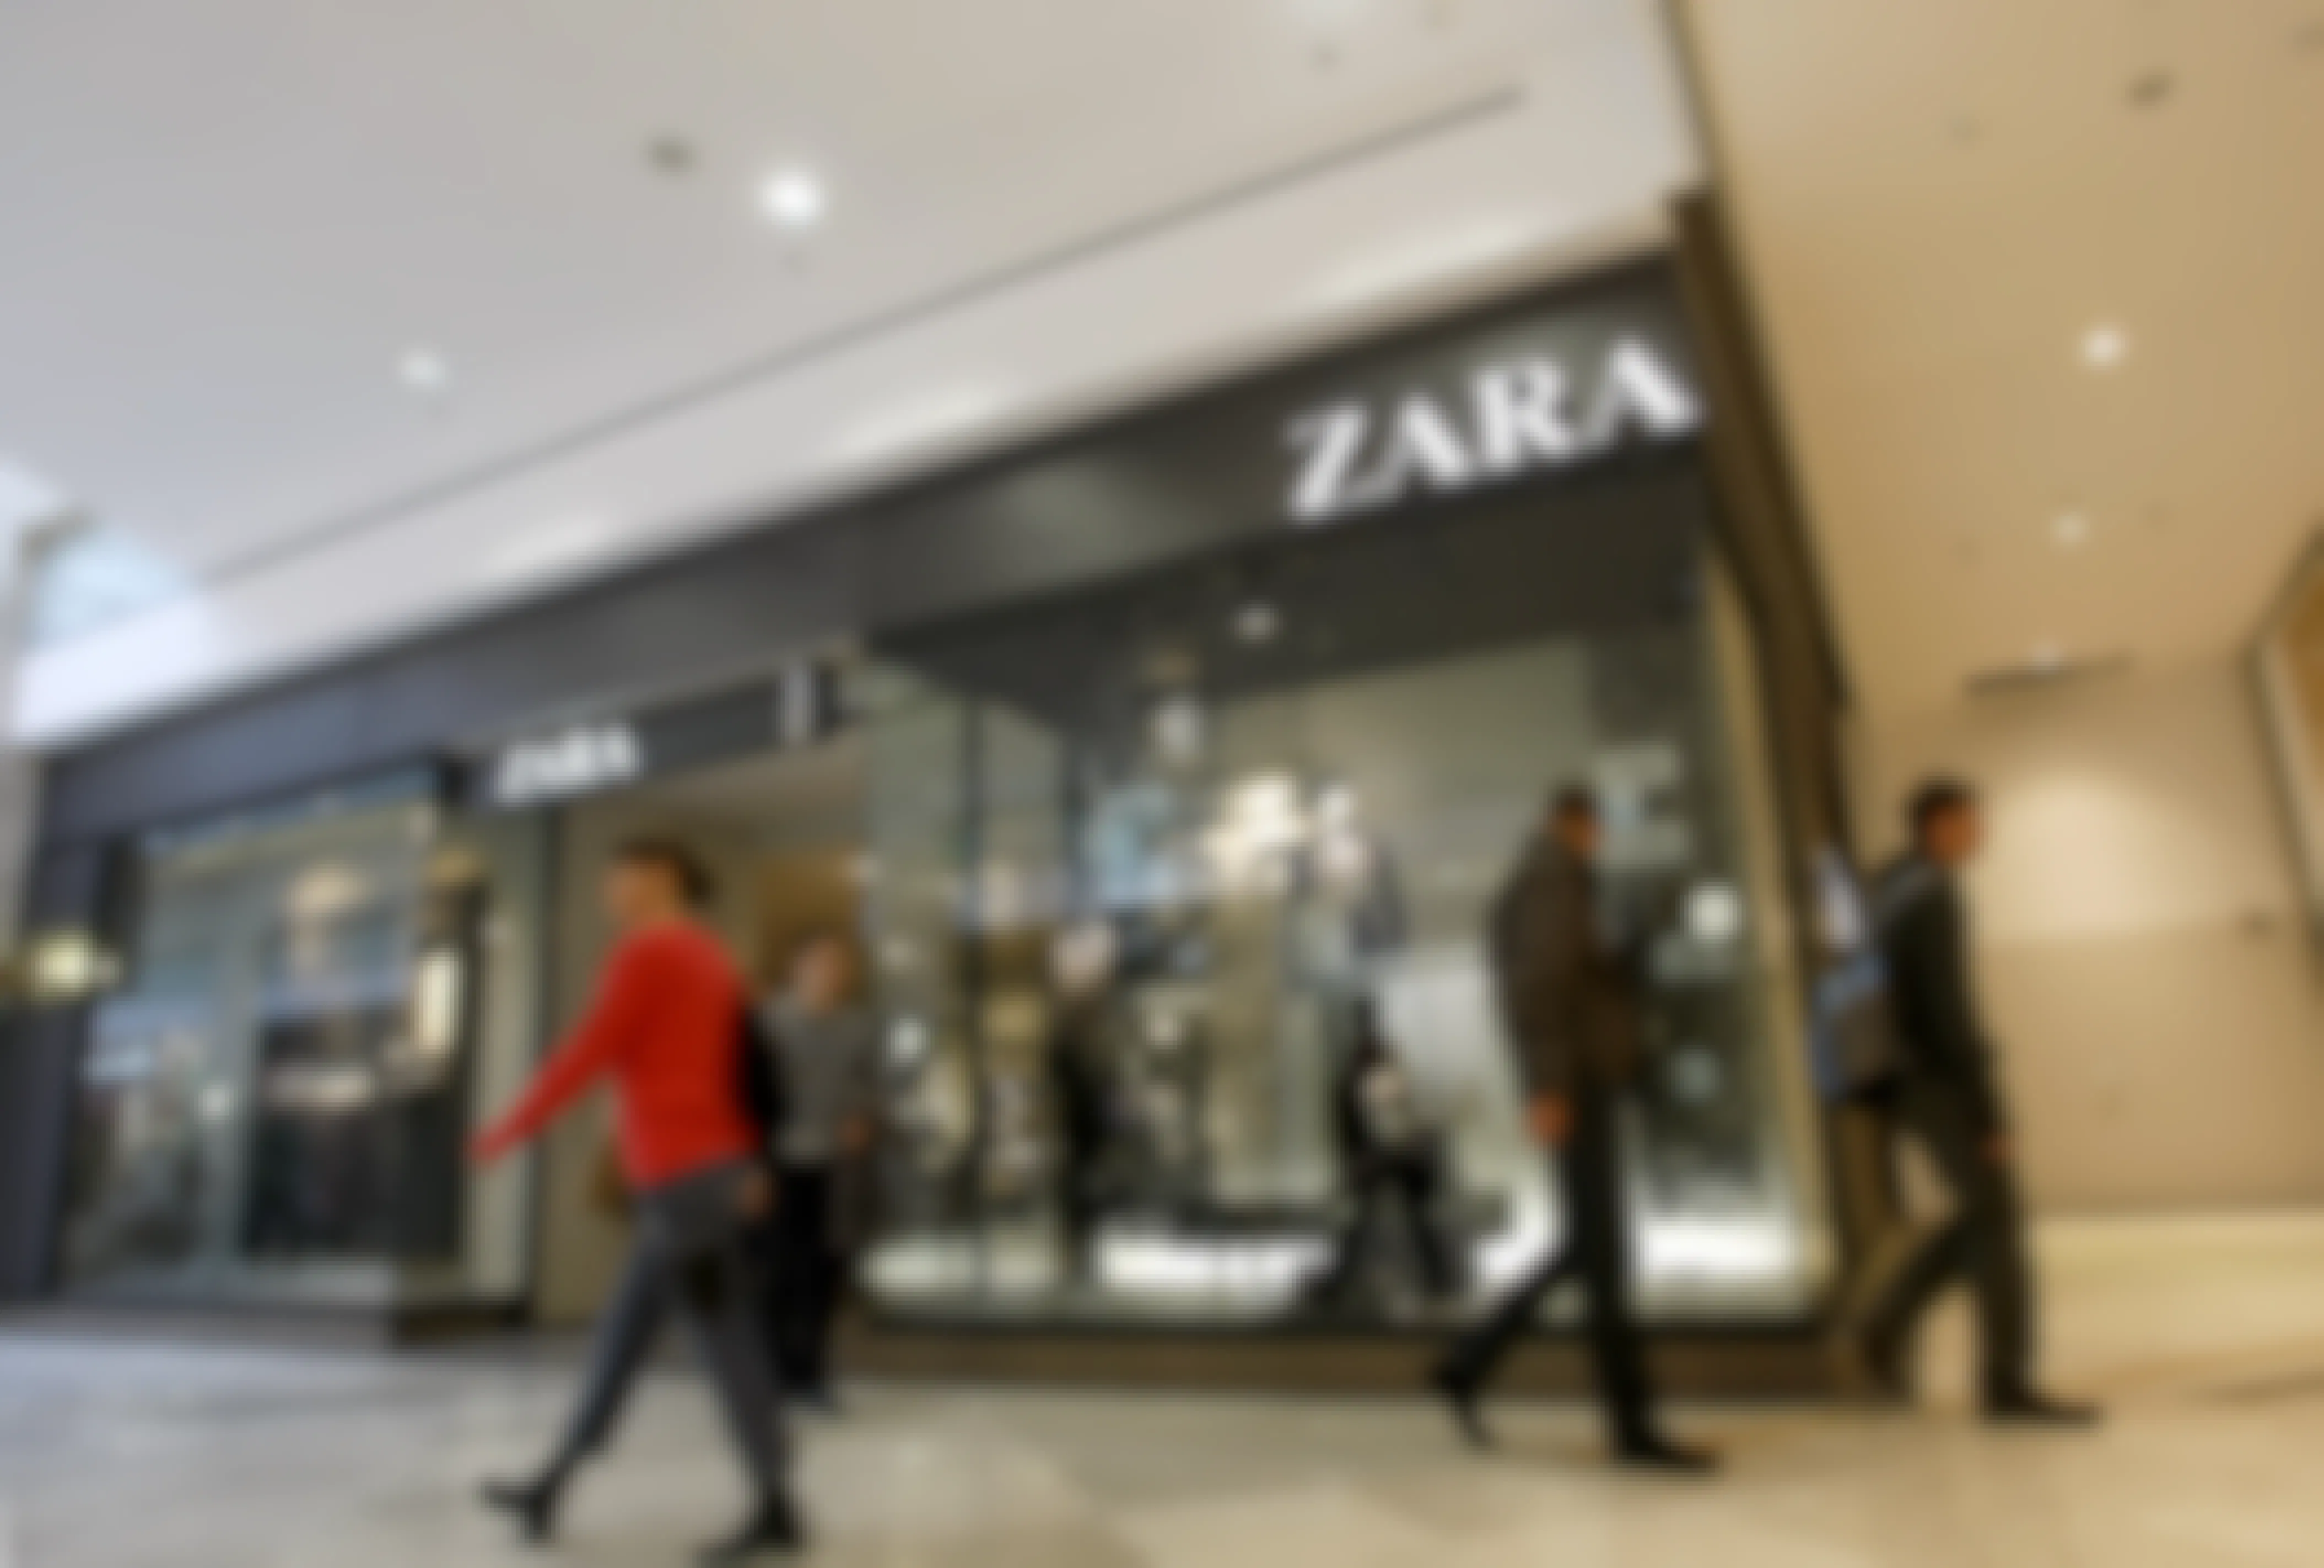 A Zara store inside a mall with shoppers passing by.